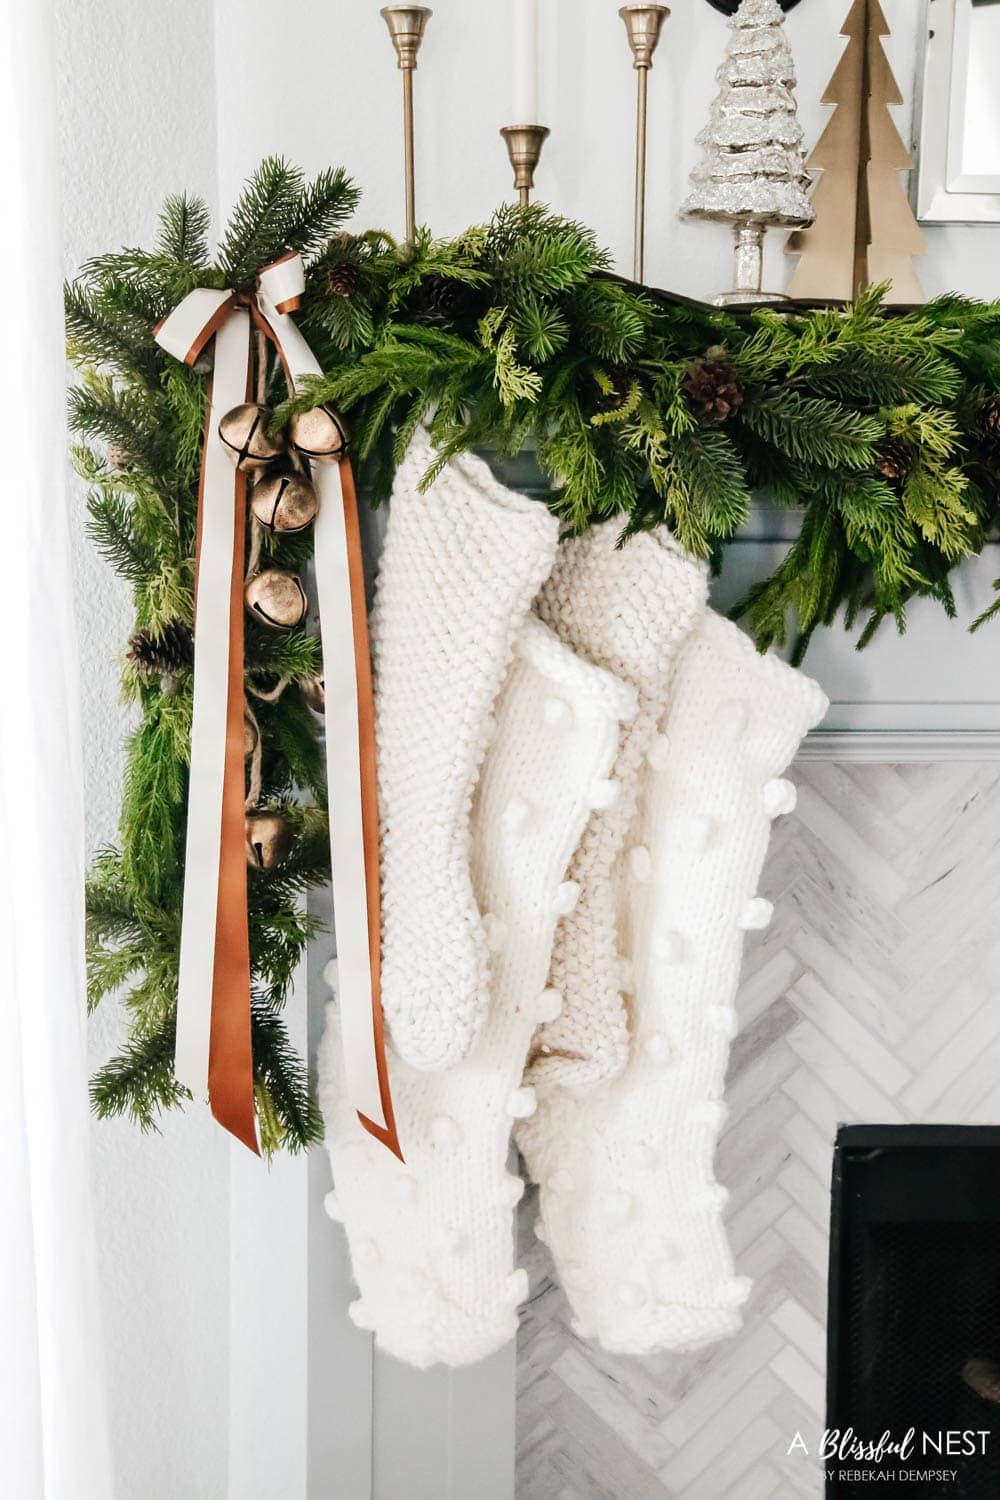 Christmas mantle with garland and chunky knit stockings.